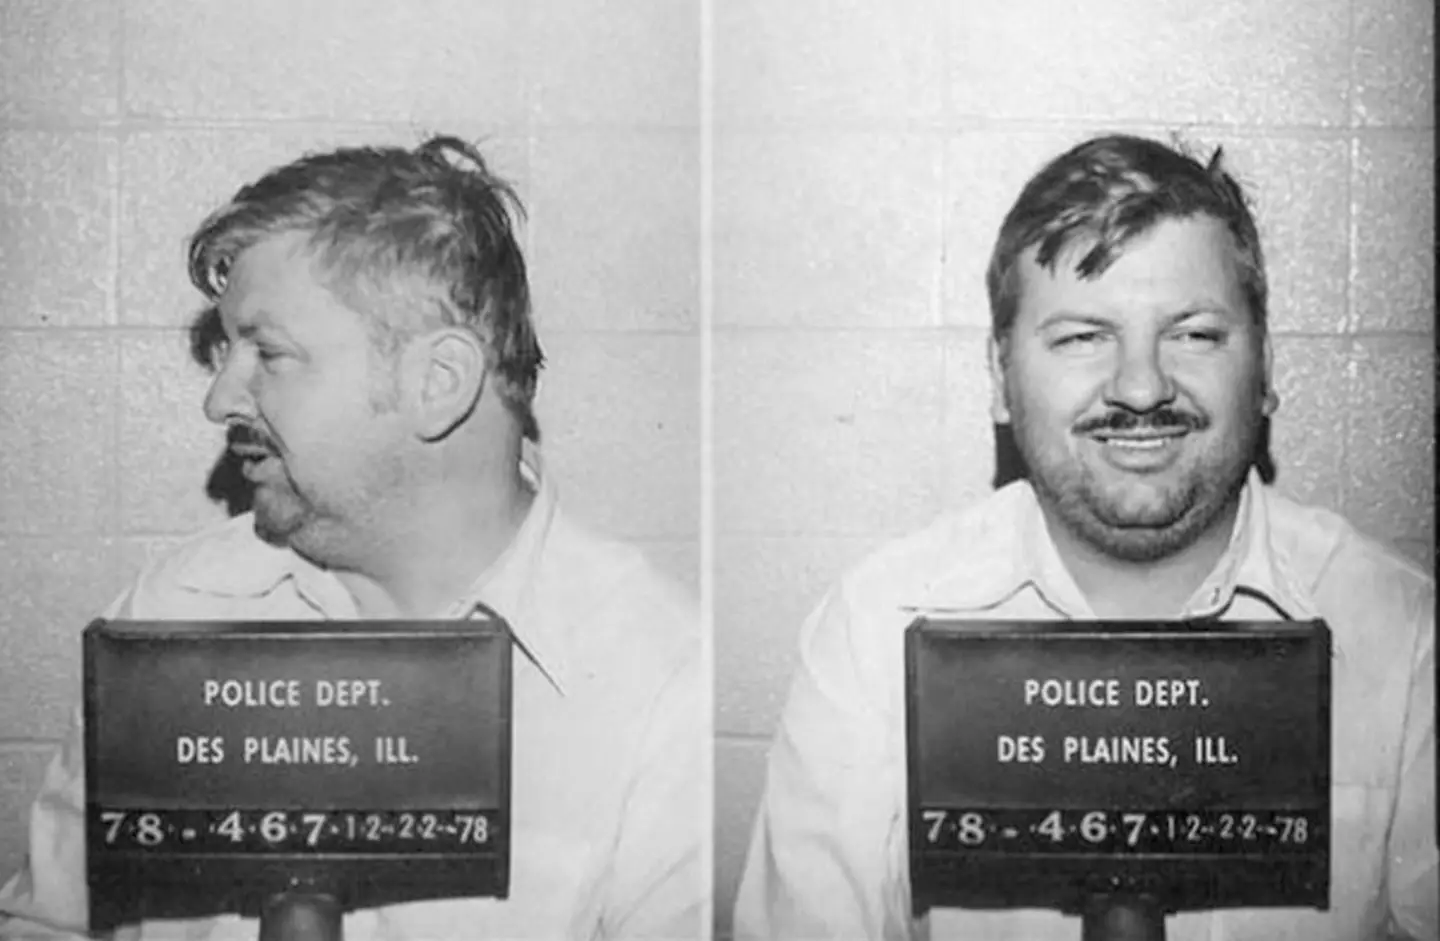 John Wayne Gacy was found guilty of murdering a total of 33 boys and men over a 6 year period.